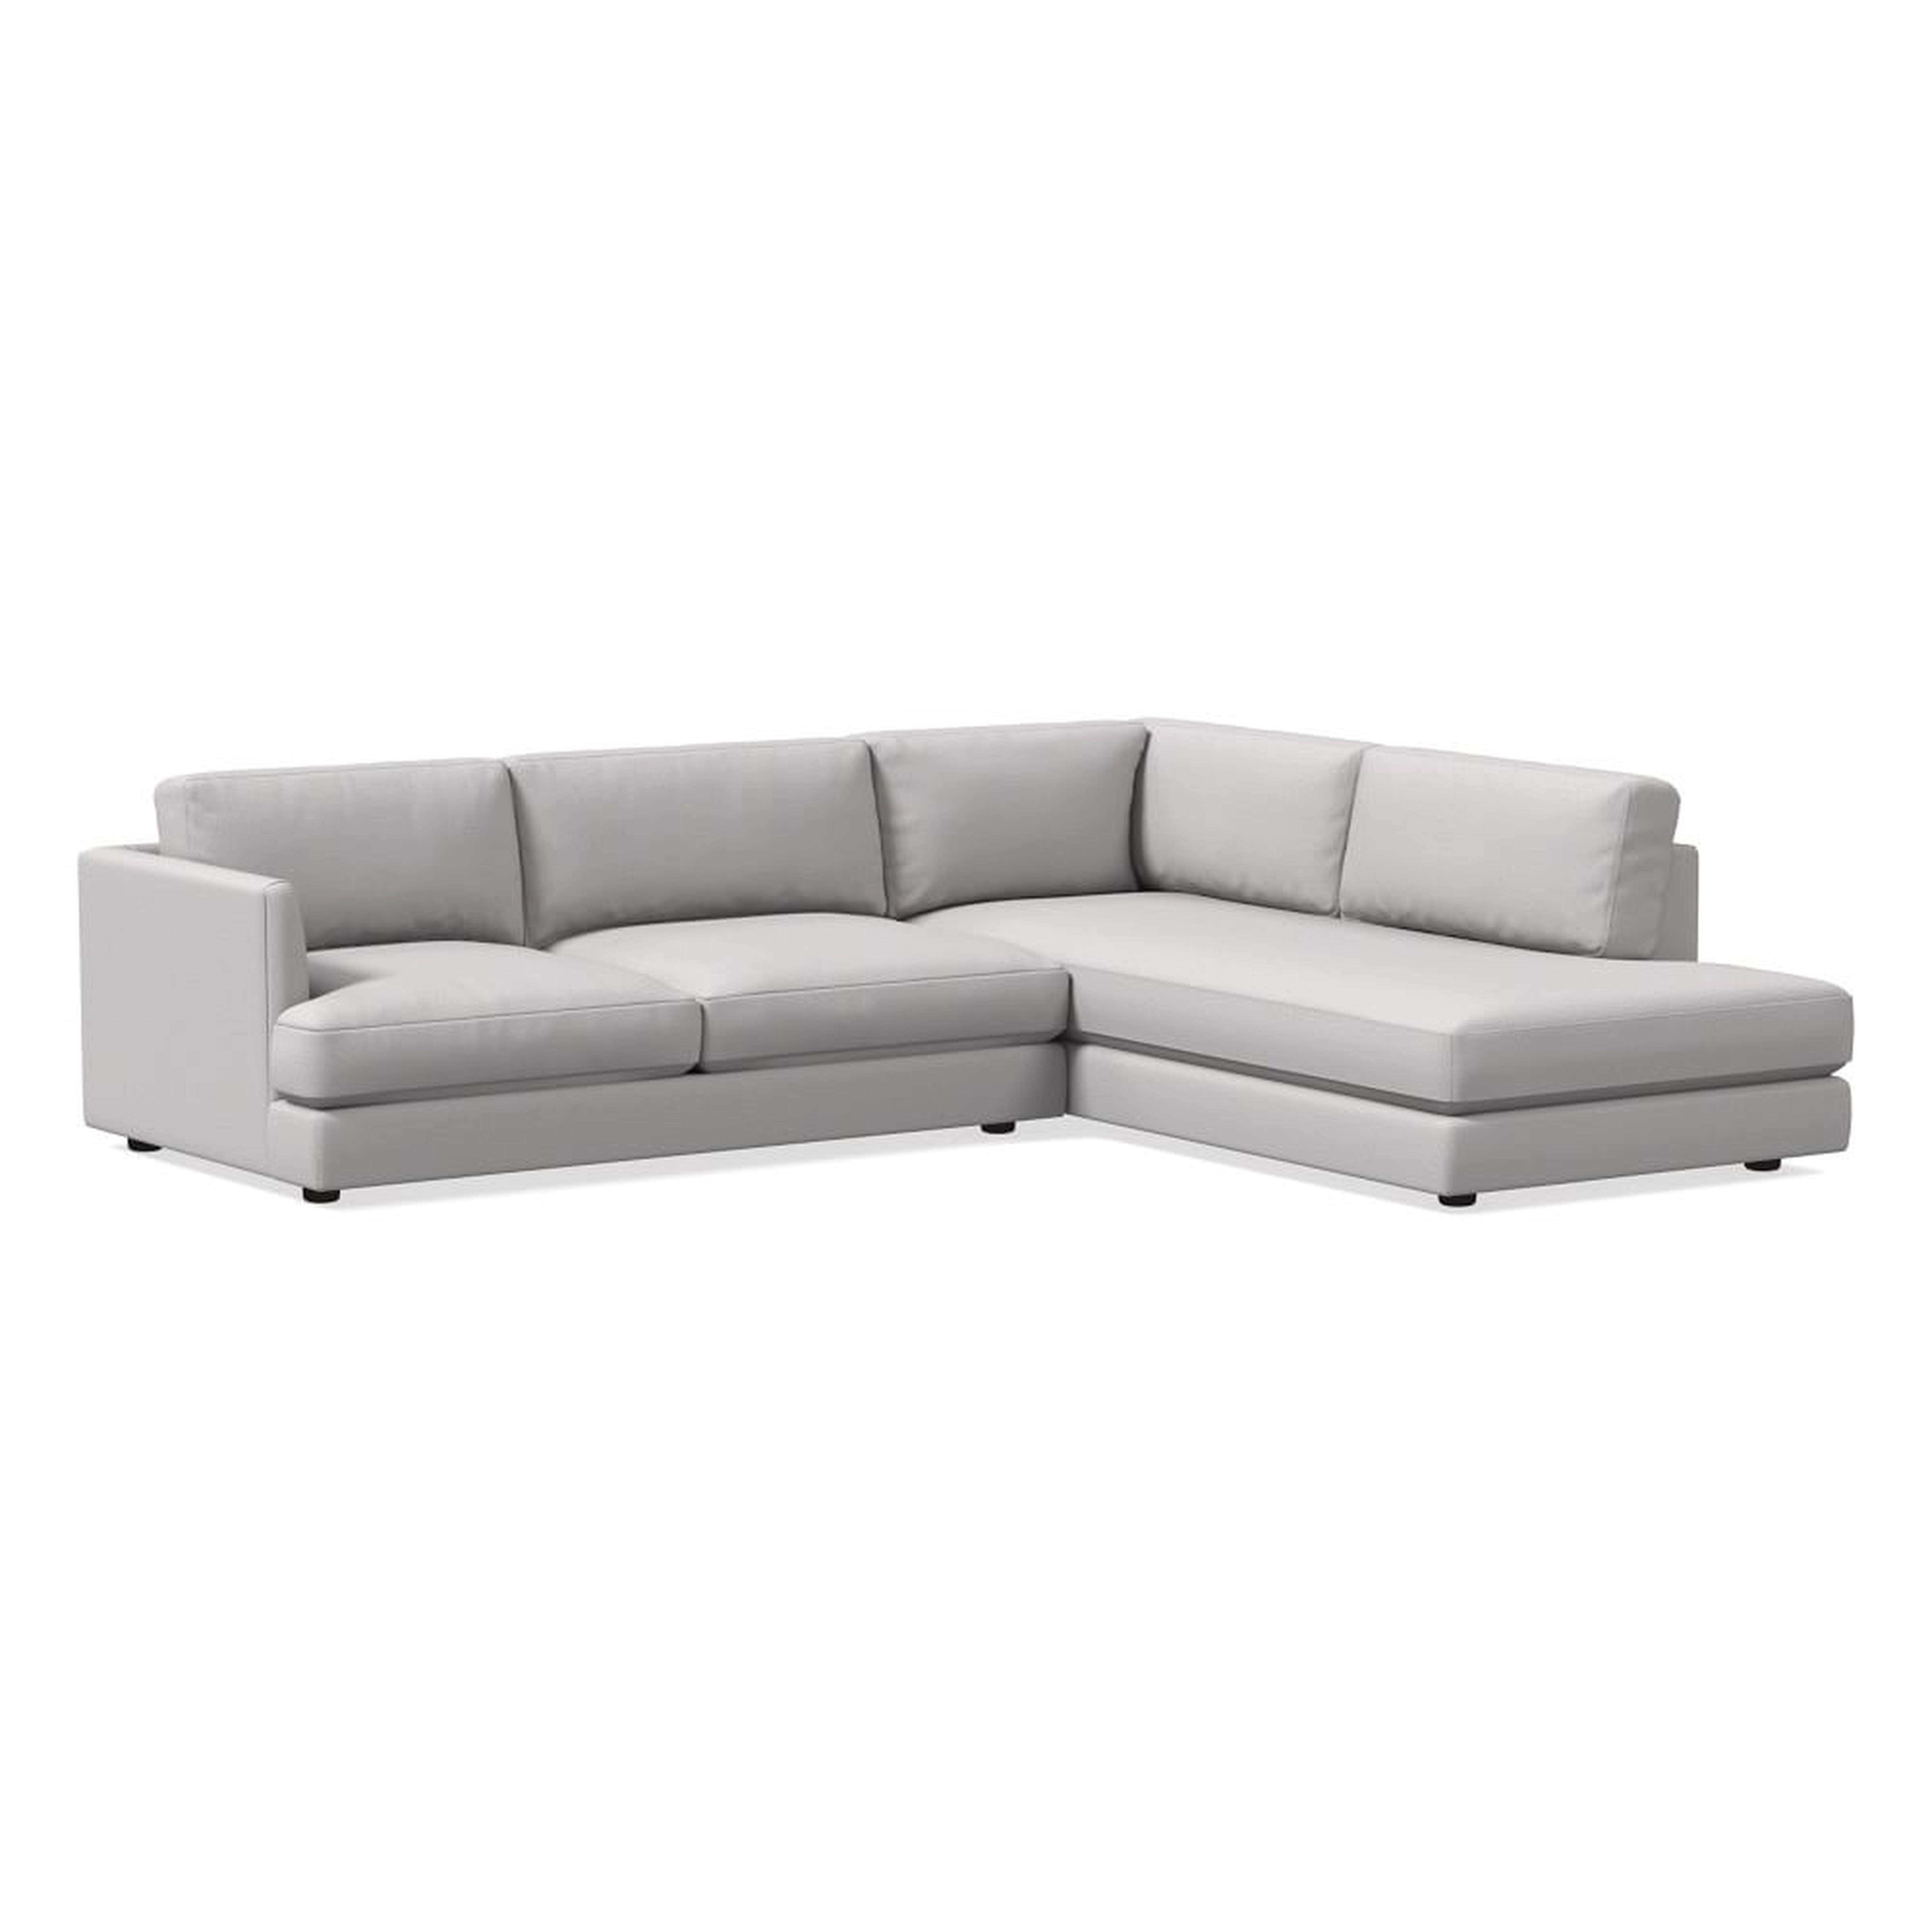 Haven 106" Right Multi Seat 2-Piece Bumper Chaise Sectional, Standard Depth, Performance Chenille Tweed, Frost Gray - West Elm